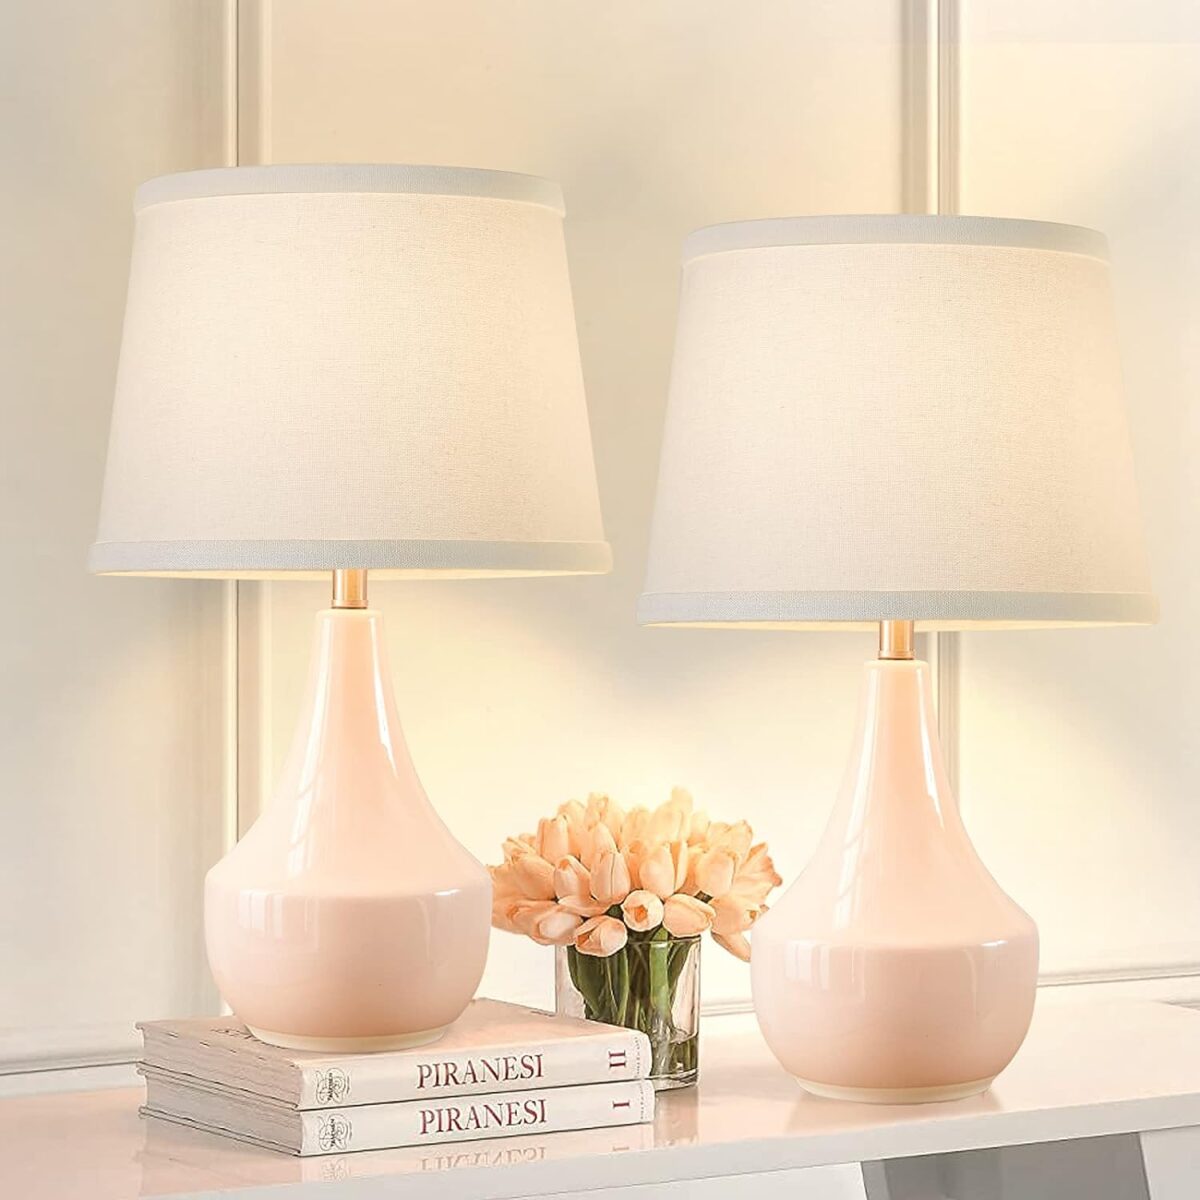 Two pink table lamps on a white table available for Prime Day.